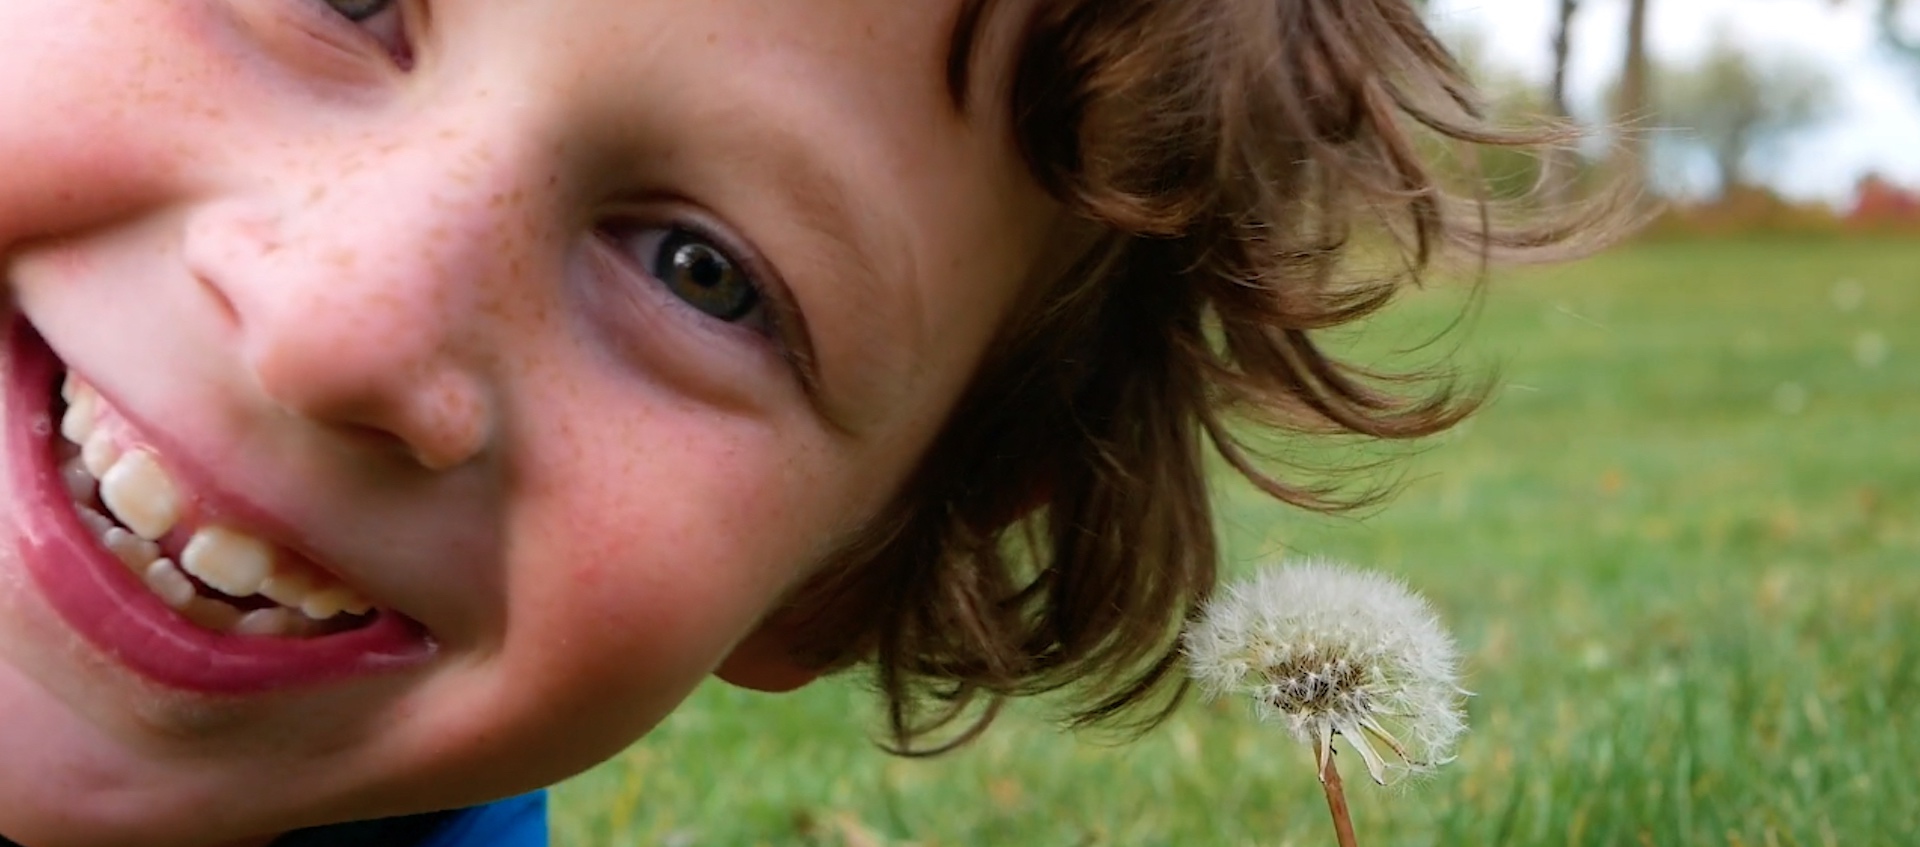 A young white boy in close-up lies in the grass next to a dandelion, staring directly into the camera, in a scene from the short film Blink of an Eye by Ohio State University student Maya Neyman